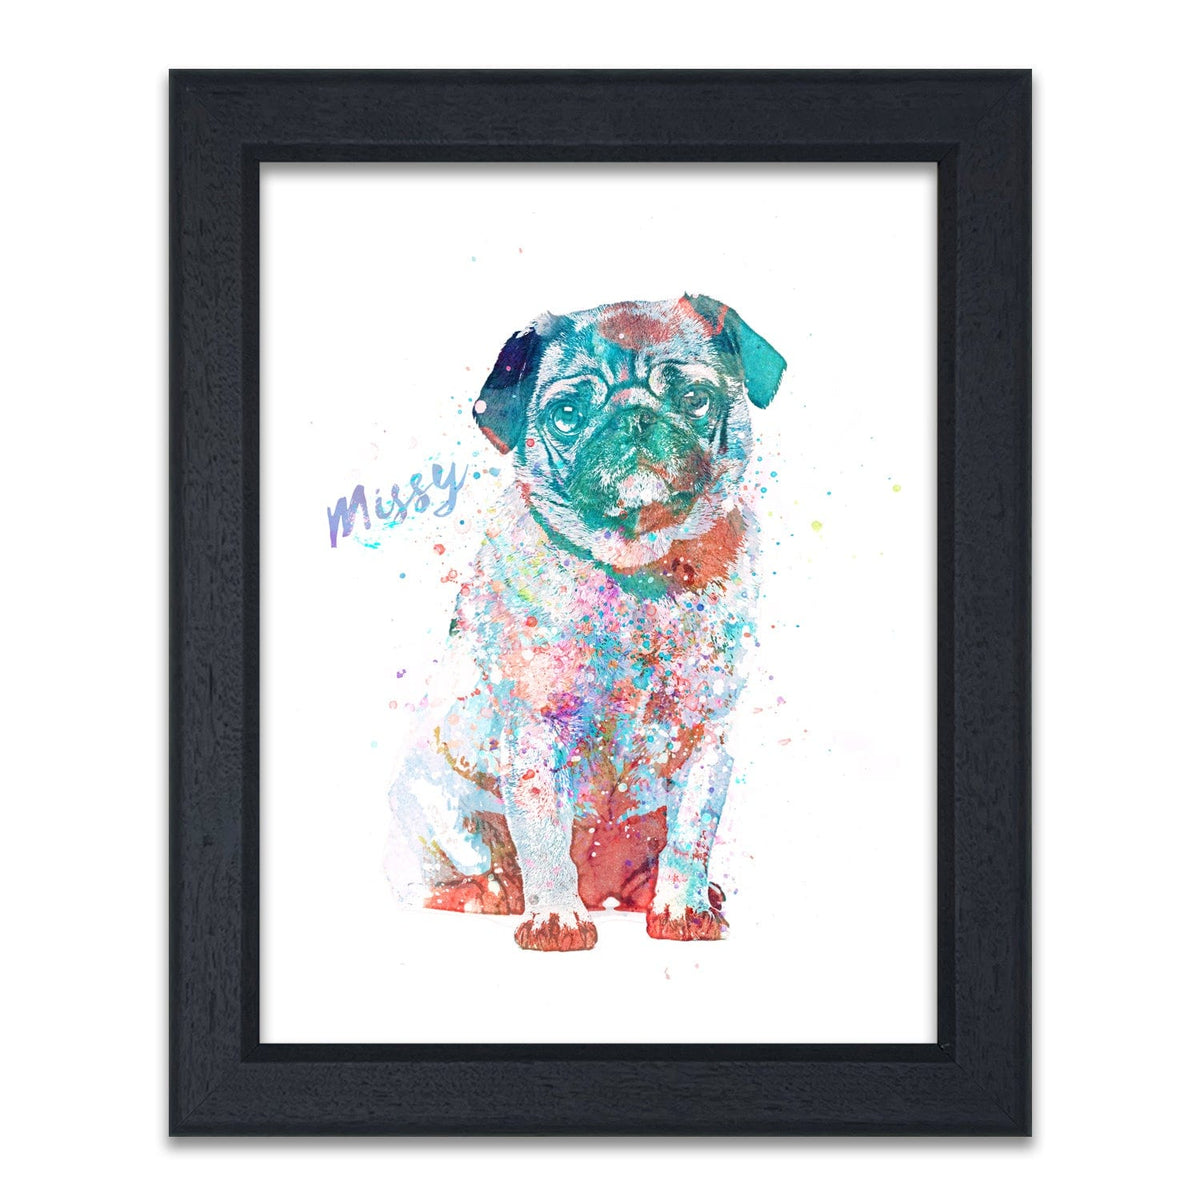 Framed Pug Art Personalized with Dogs Name from Personal-Prints